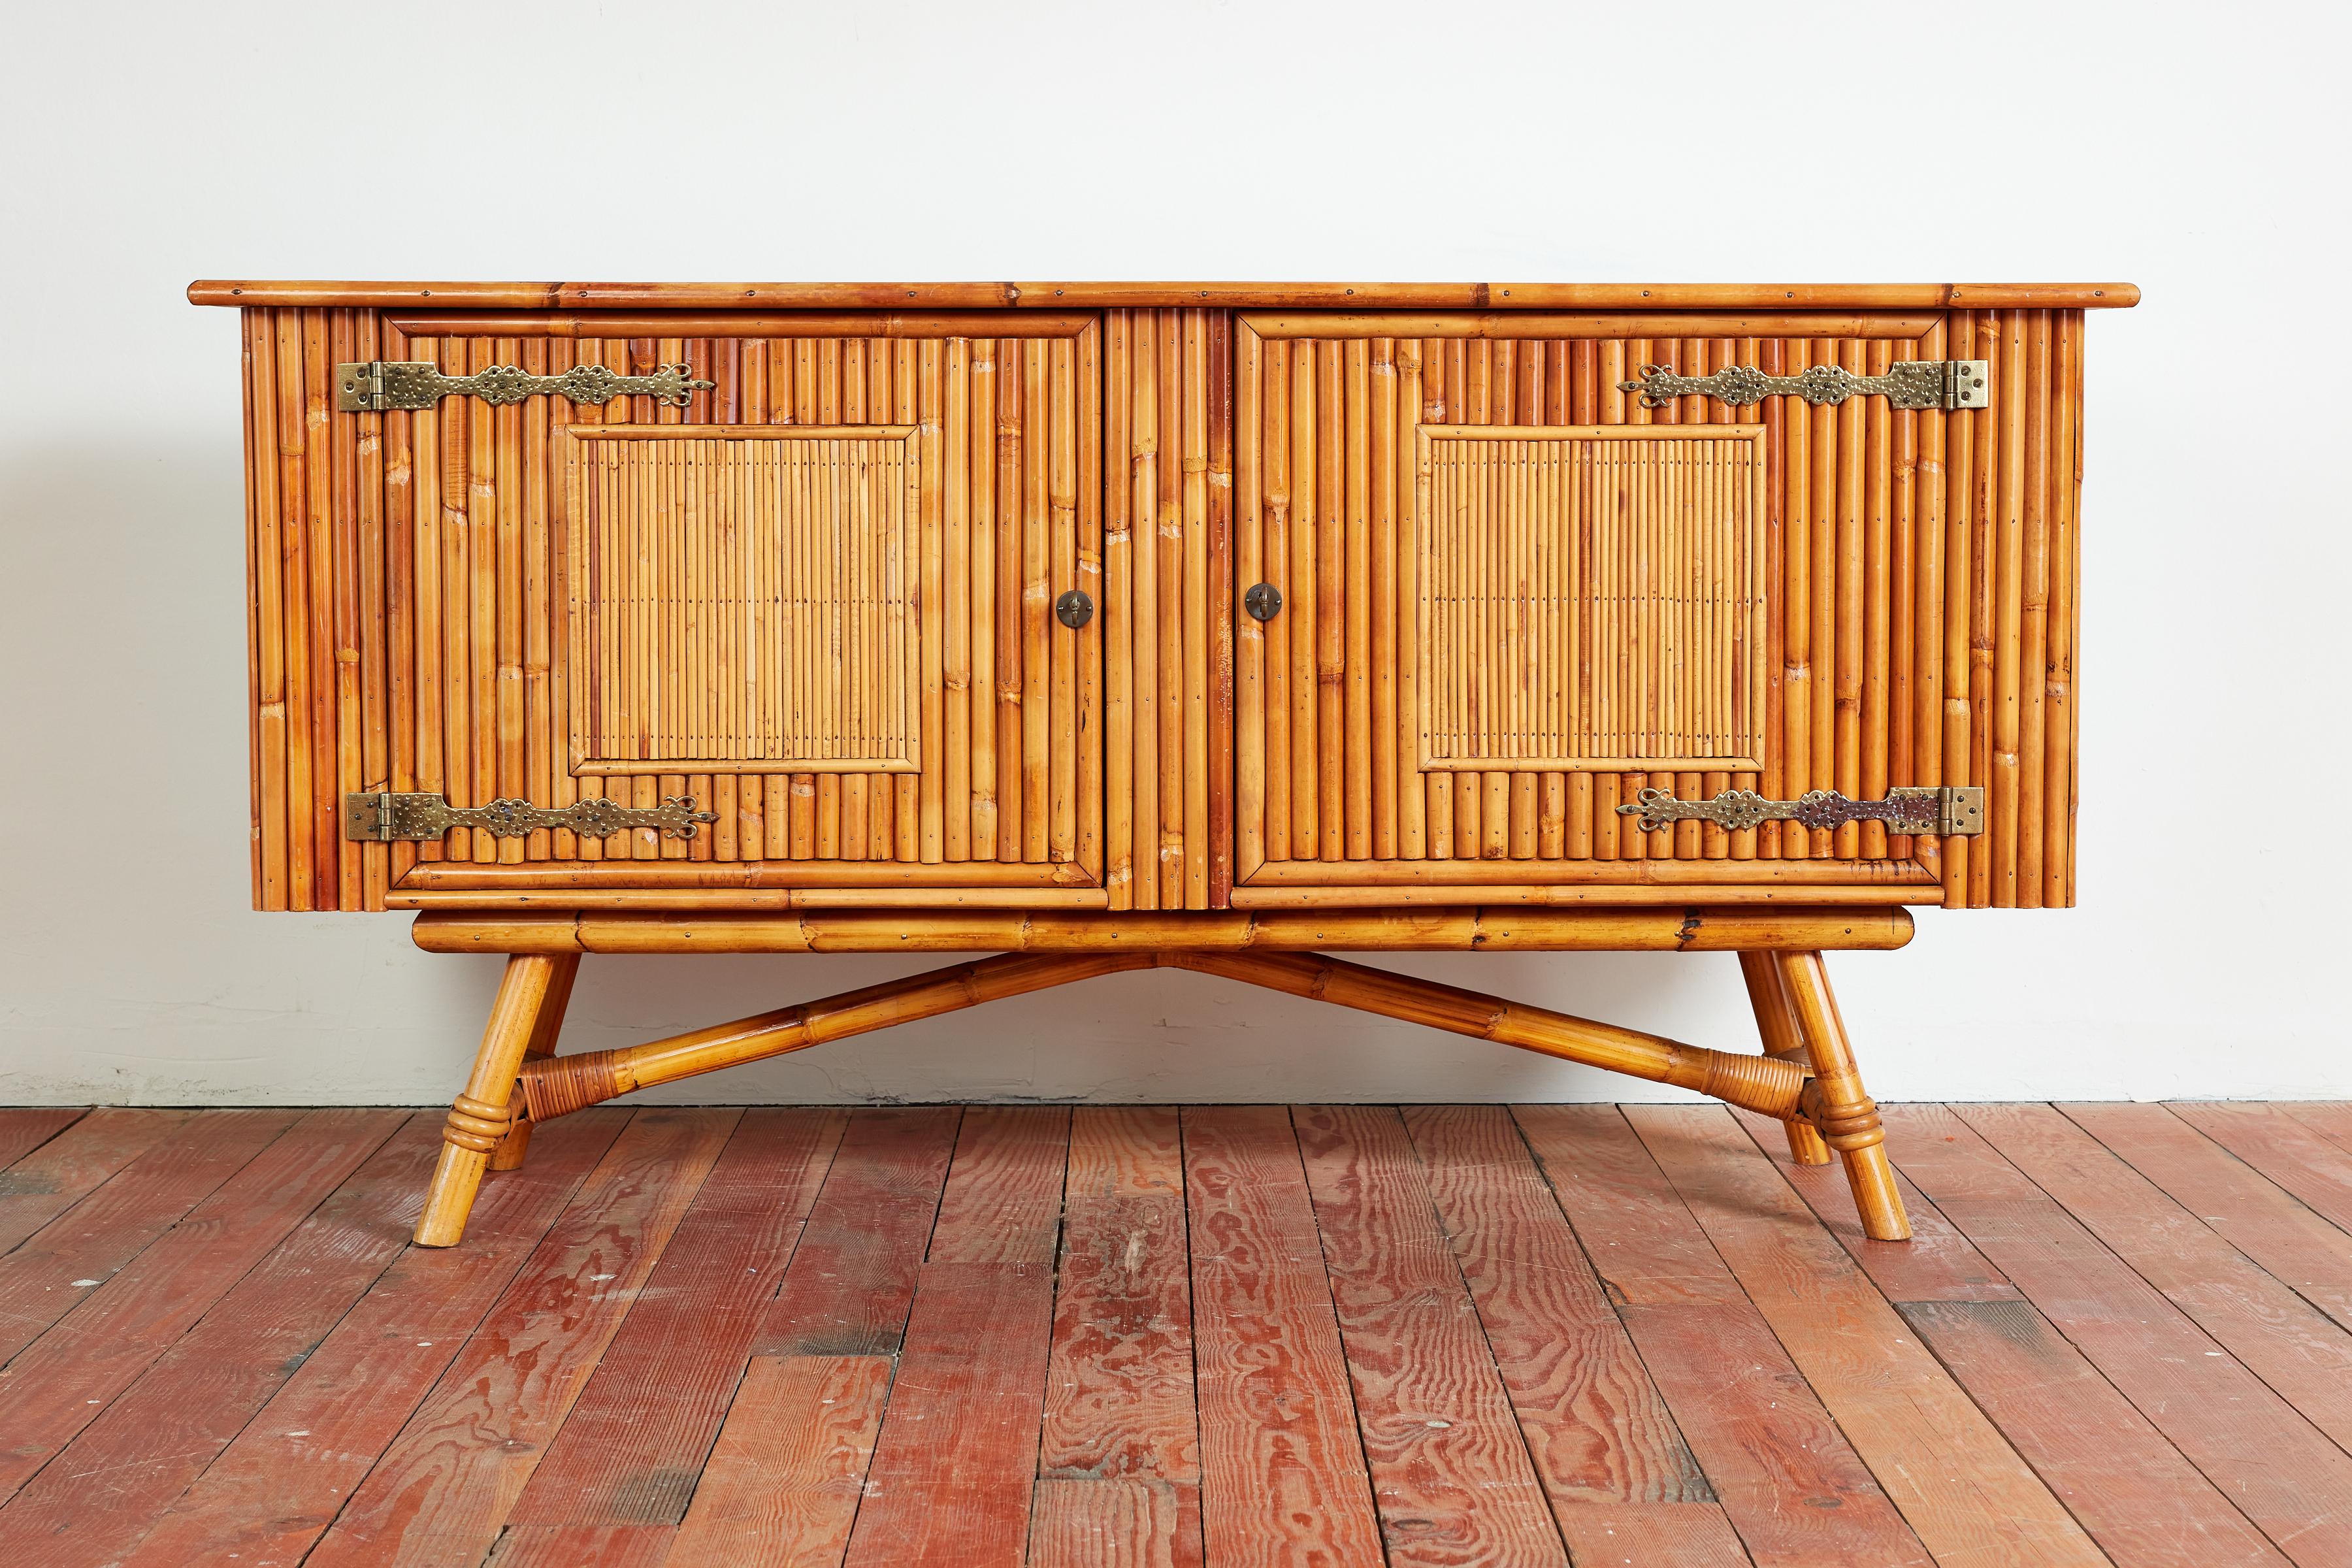 Audoux Minet bamboo sideboard with ornate brass hinges and hardware, oak wood top and open shelving interiors for storage.